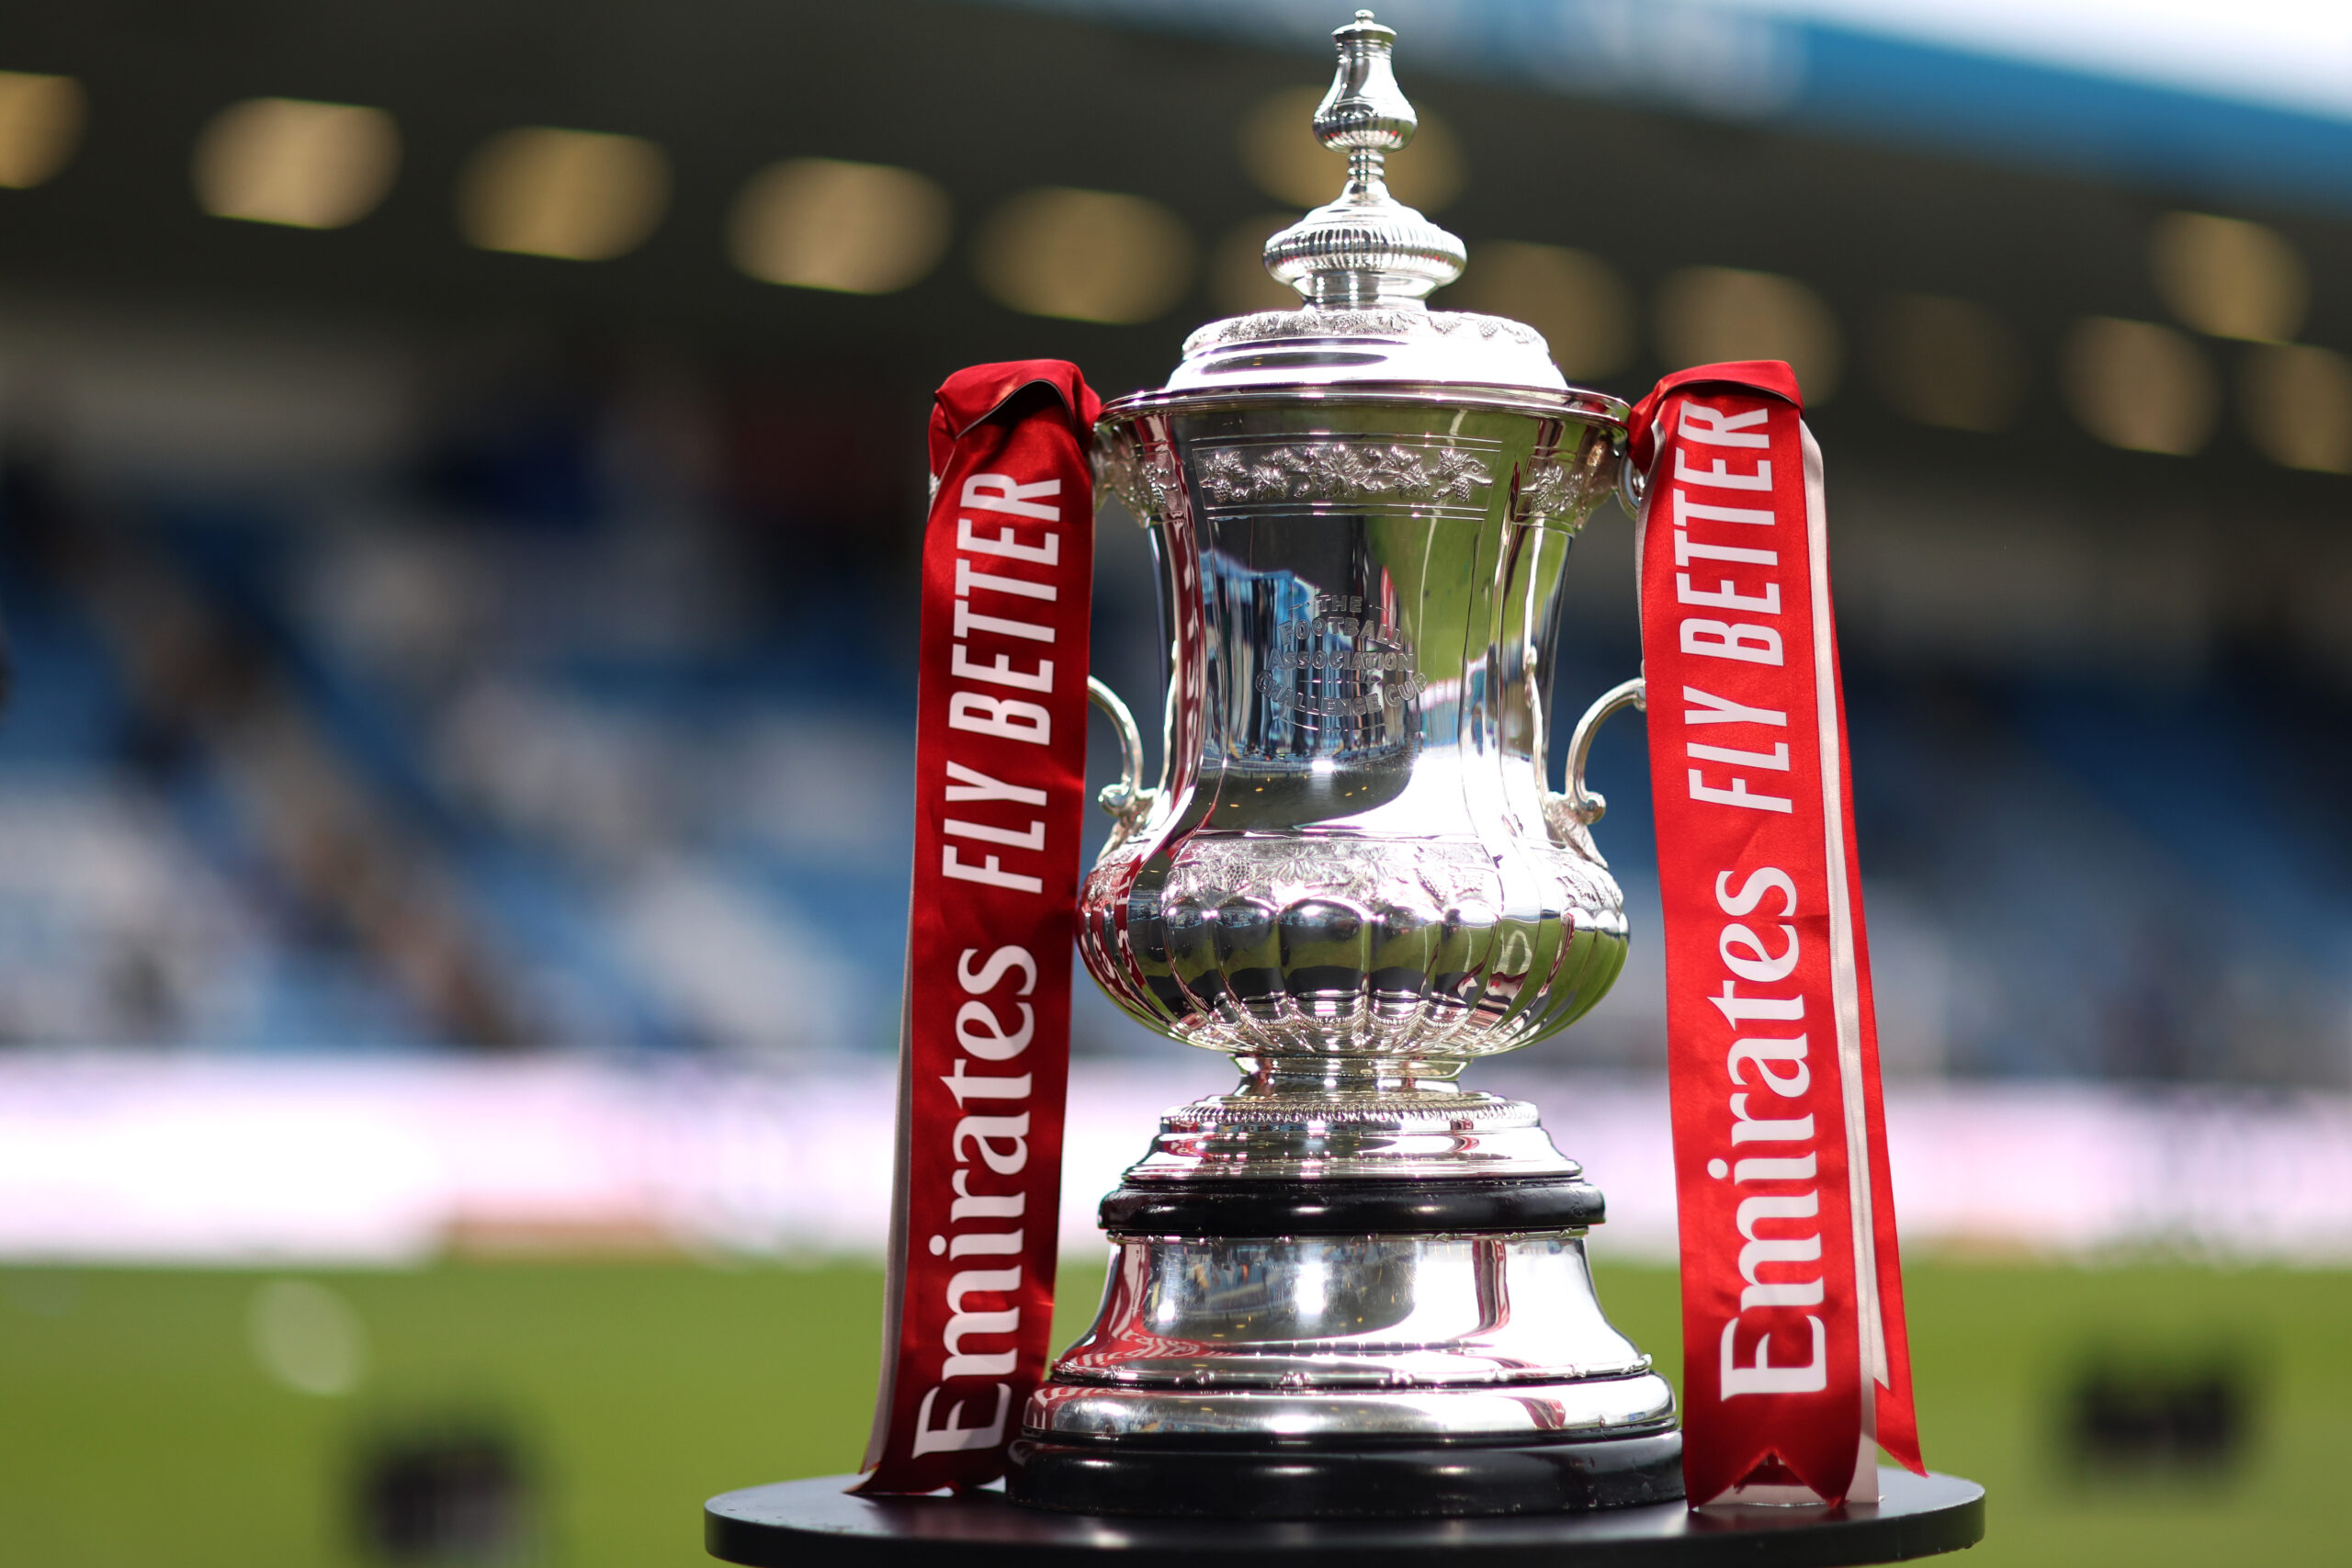 The FA Cup is a coveted trophy in England